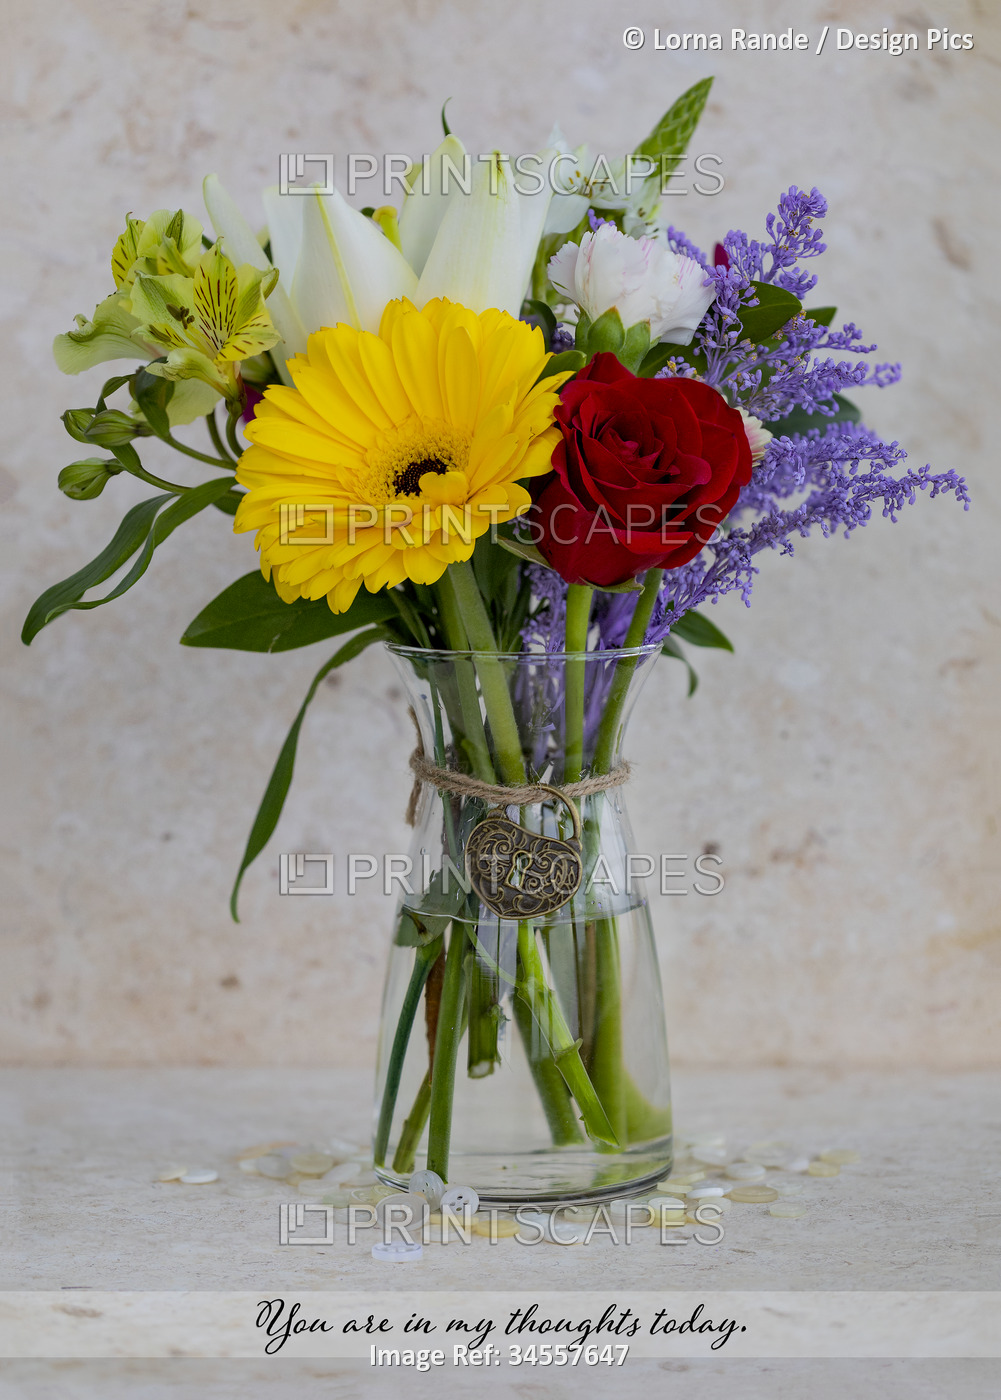 Small, colorful bouquet in a glass vase with a thoughtful message in text and a ...